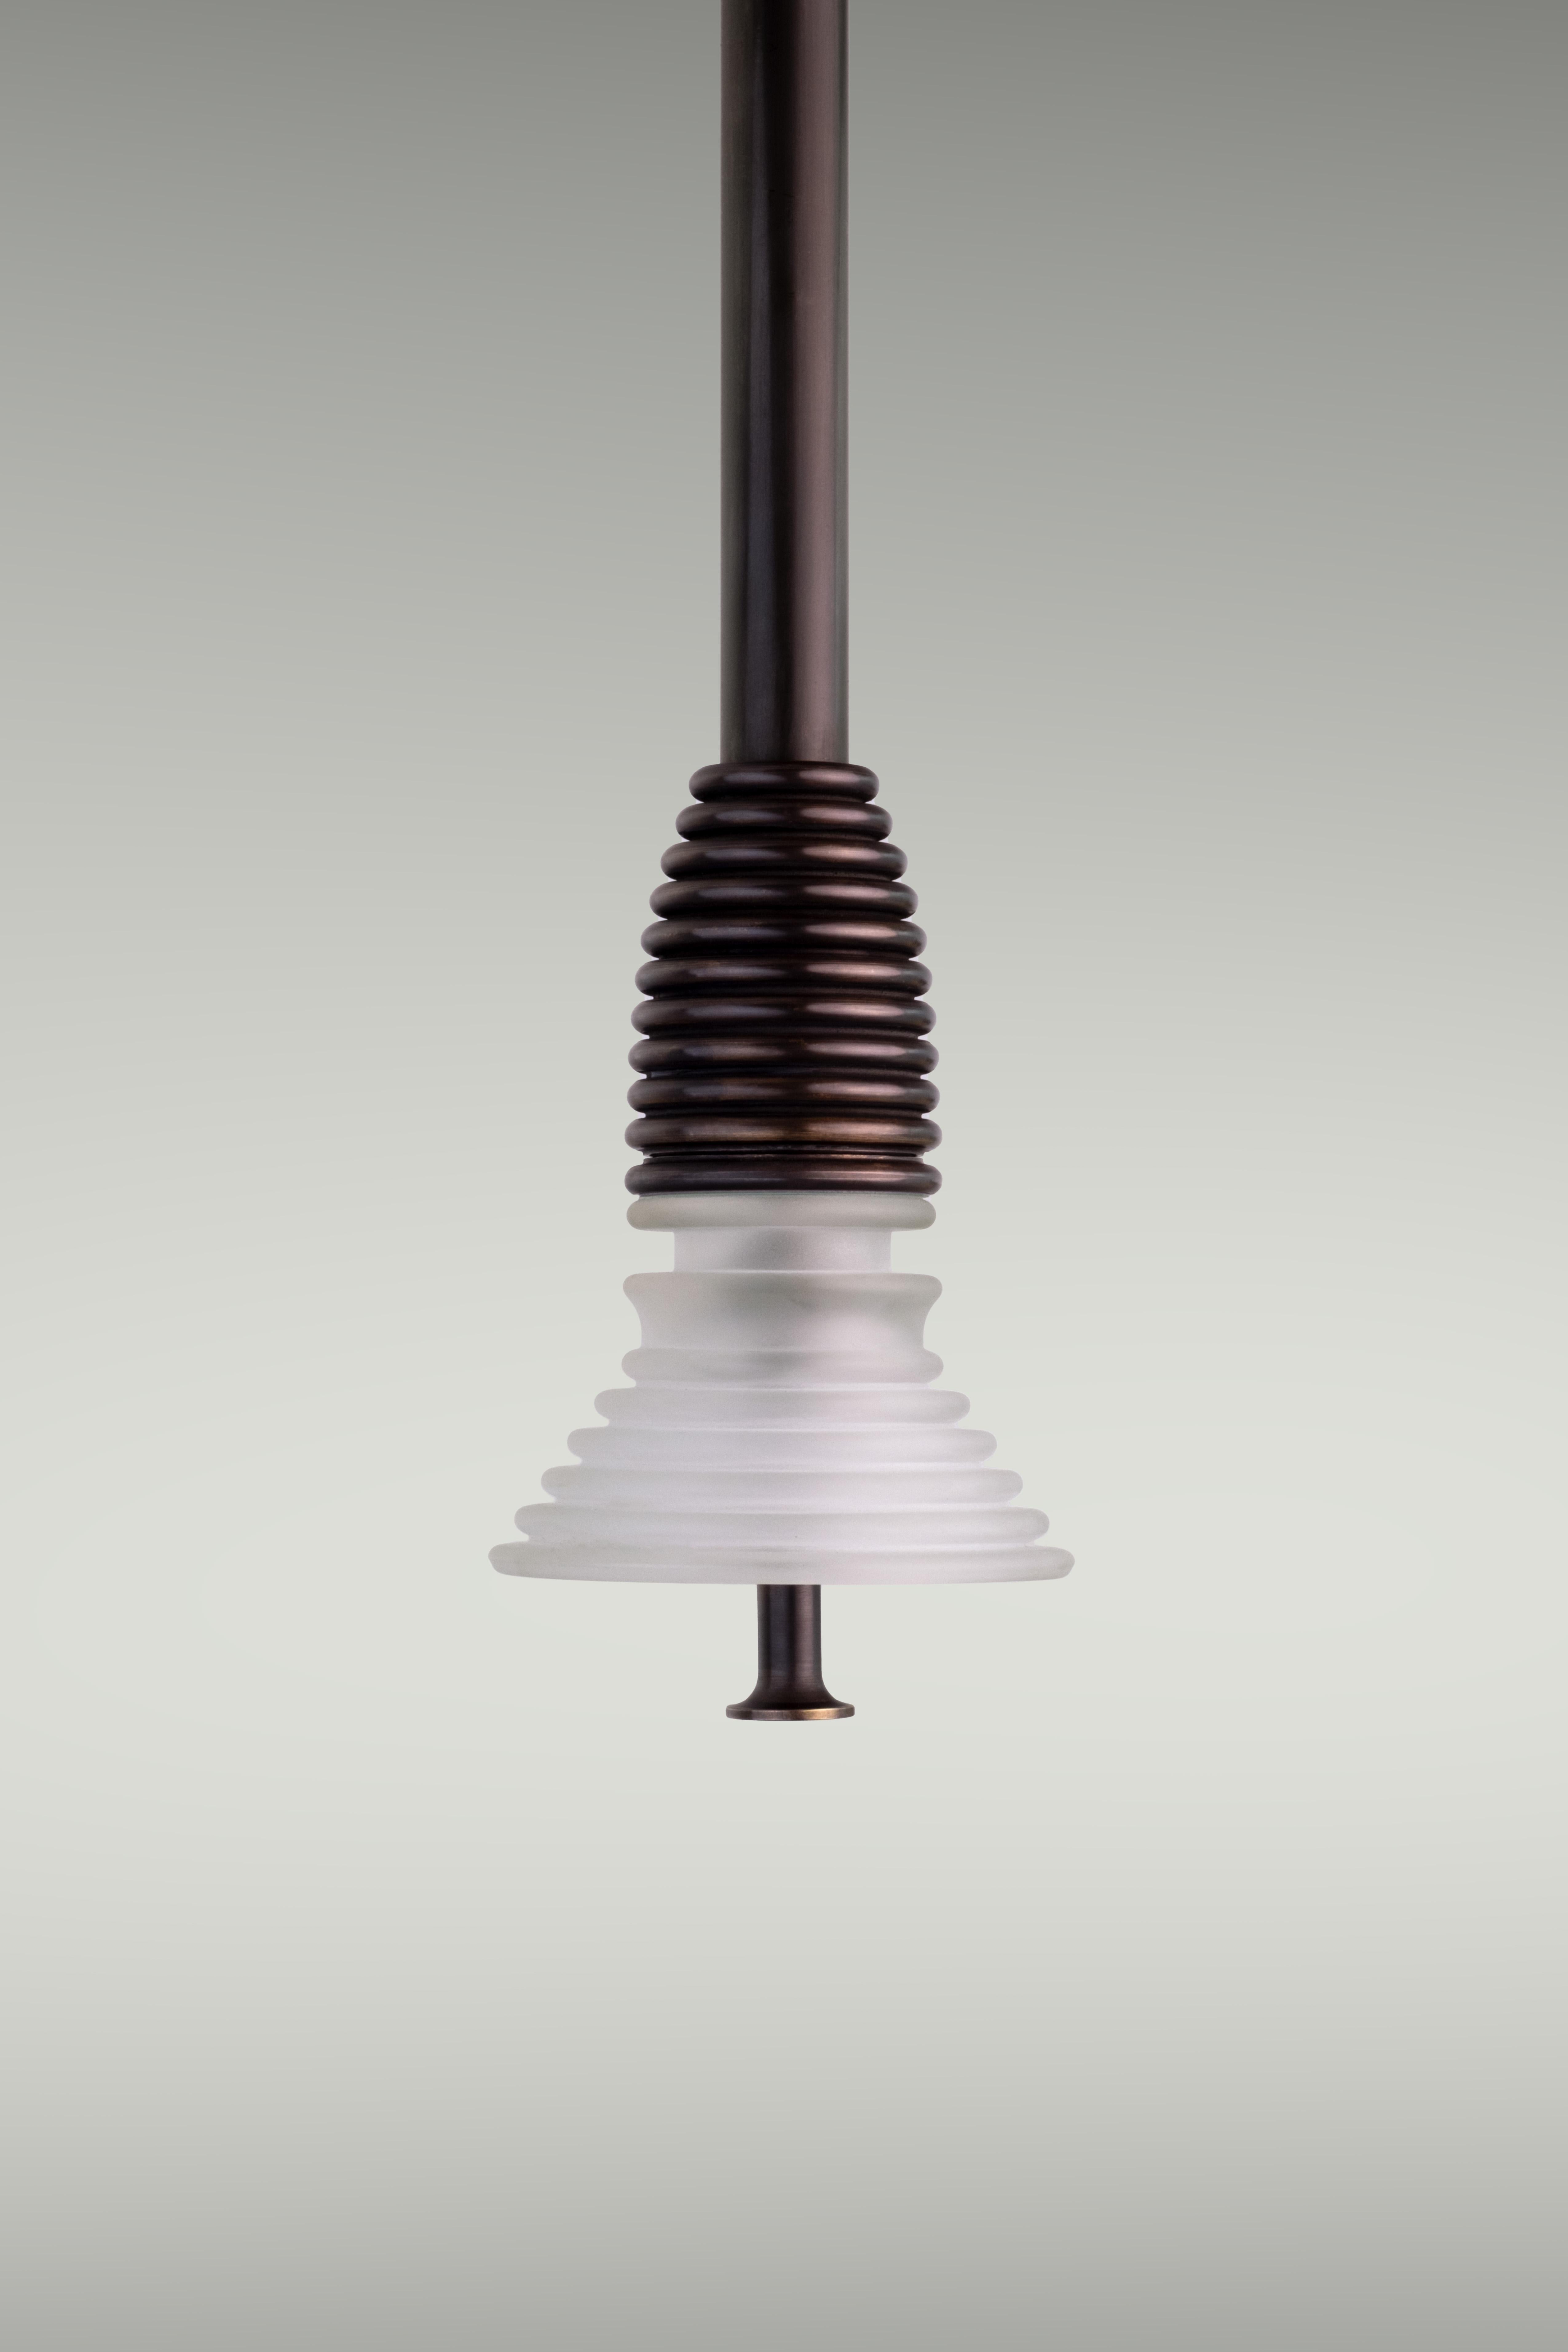 The Insulator 'A' Pendant in dark brass and clear glass by NOVOCASTRIAN deco For Sale 7